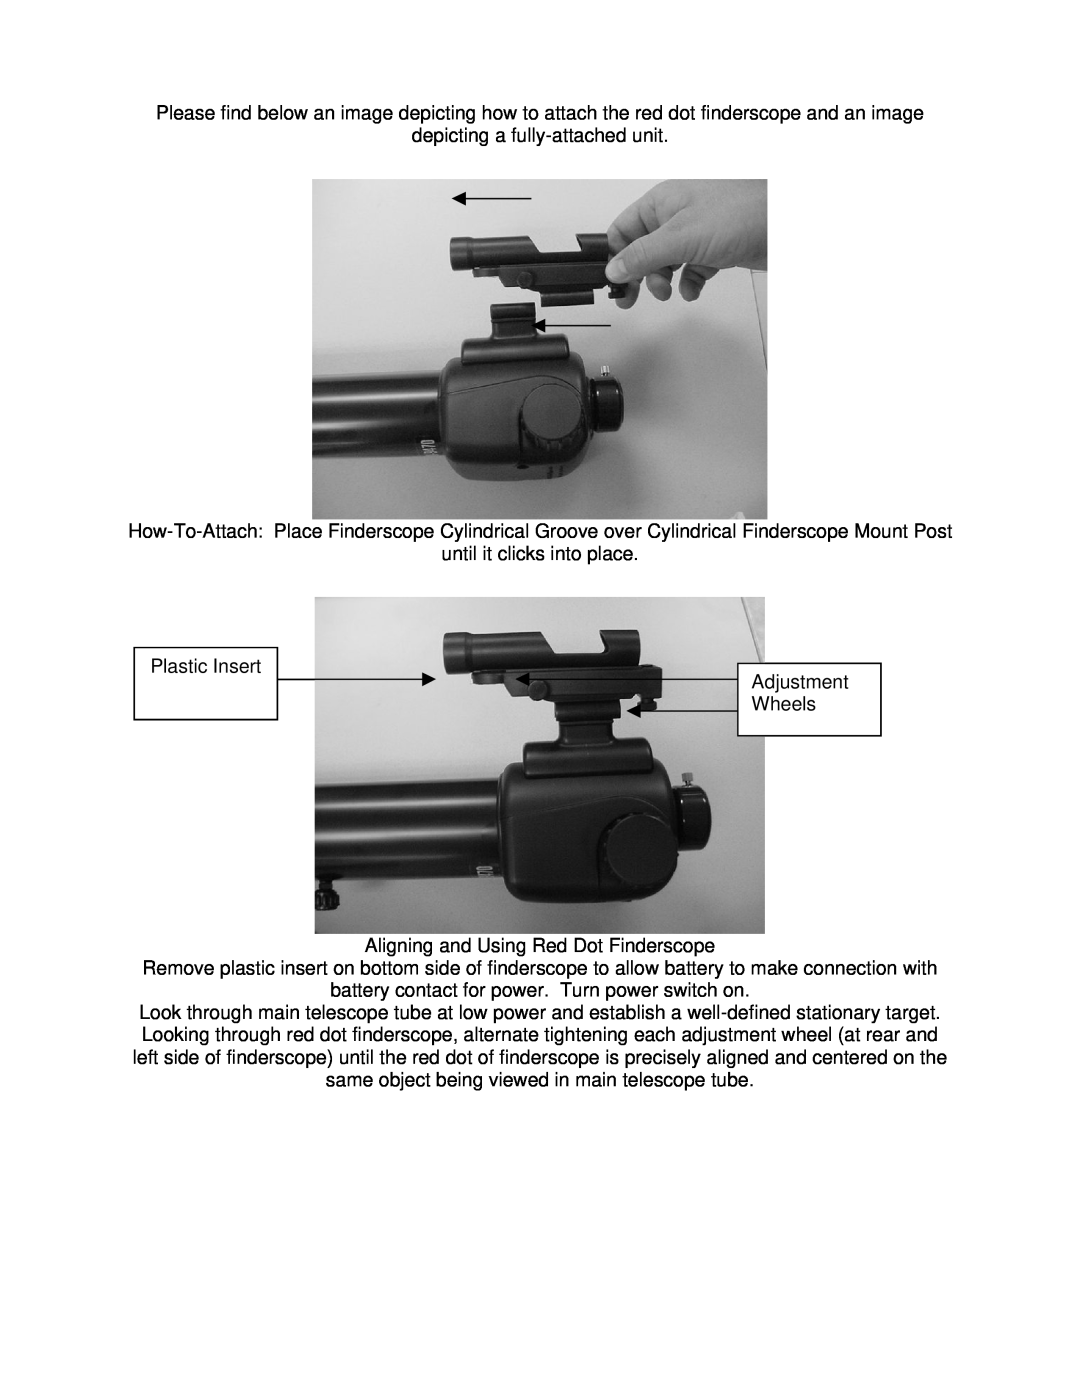 Bushnell 78-9470 manual depicting a fully-attached unit, until it clicks into place Plastic Insert Adjustment Wheels 